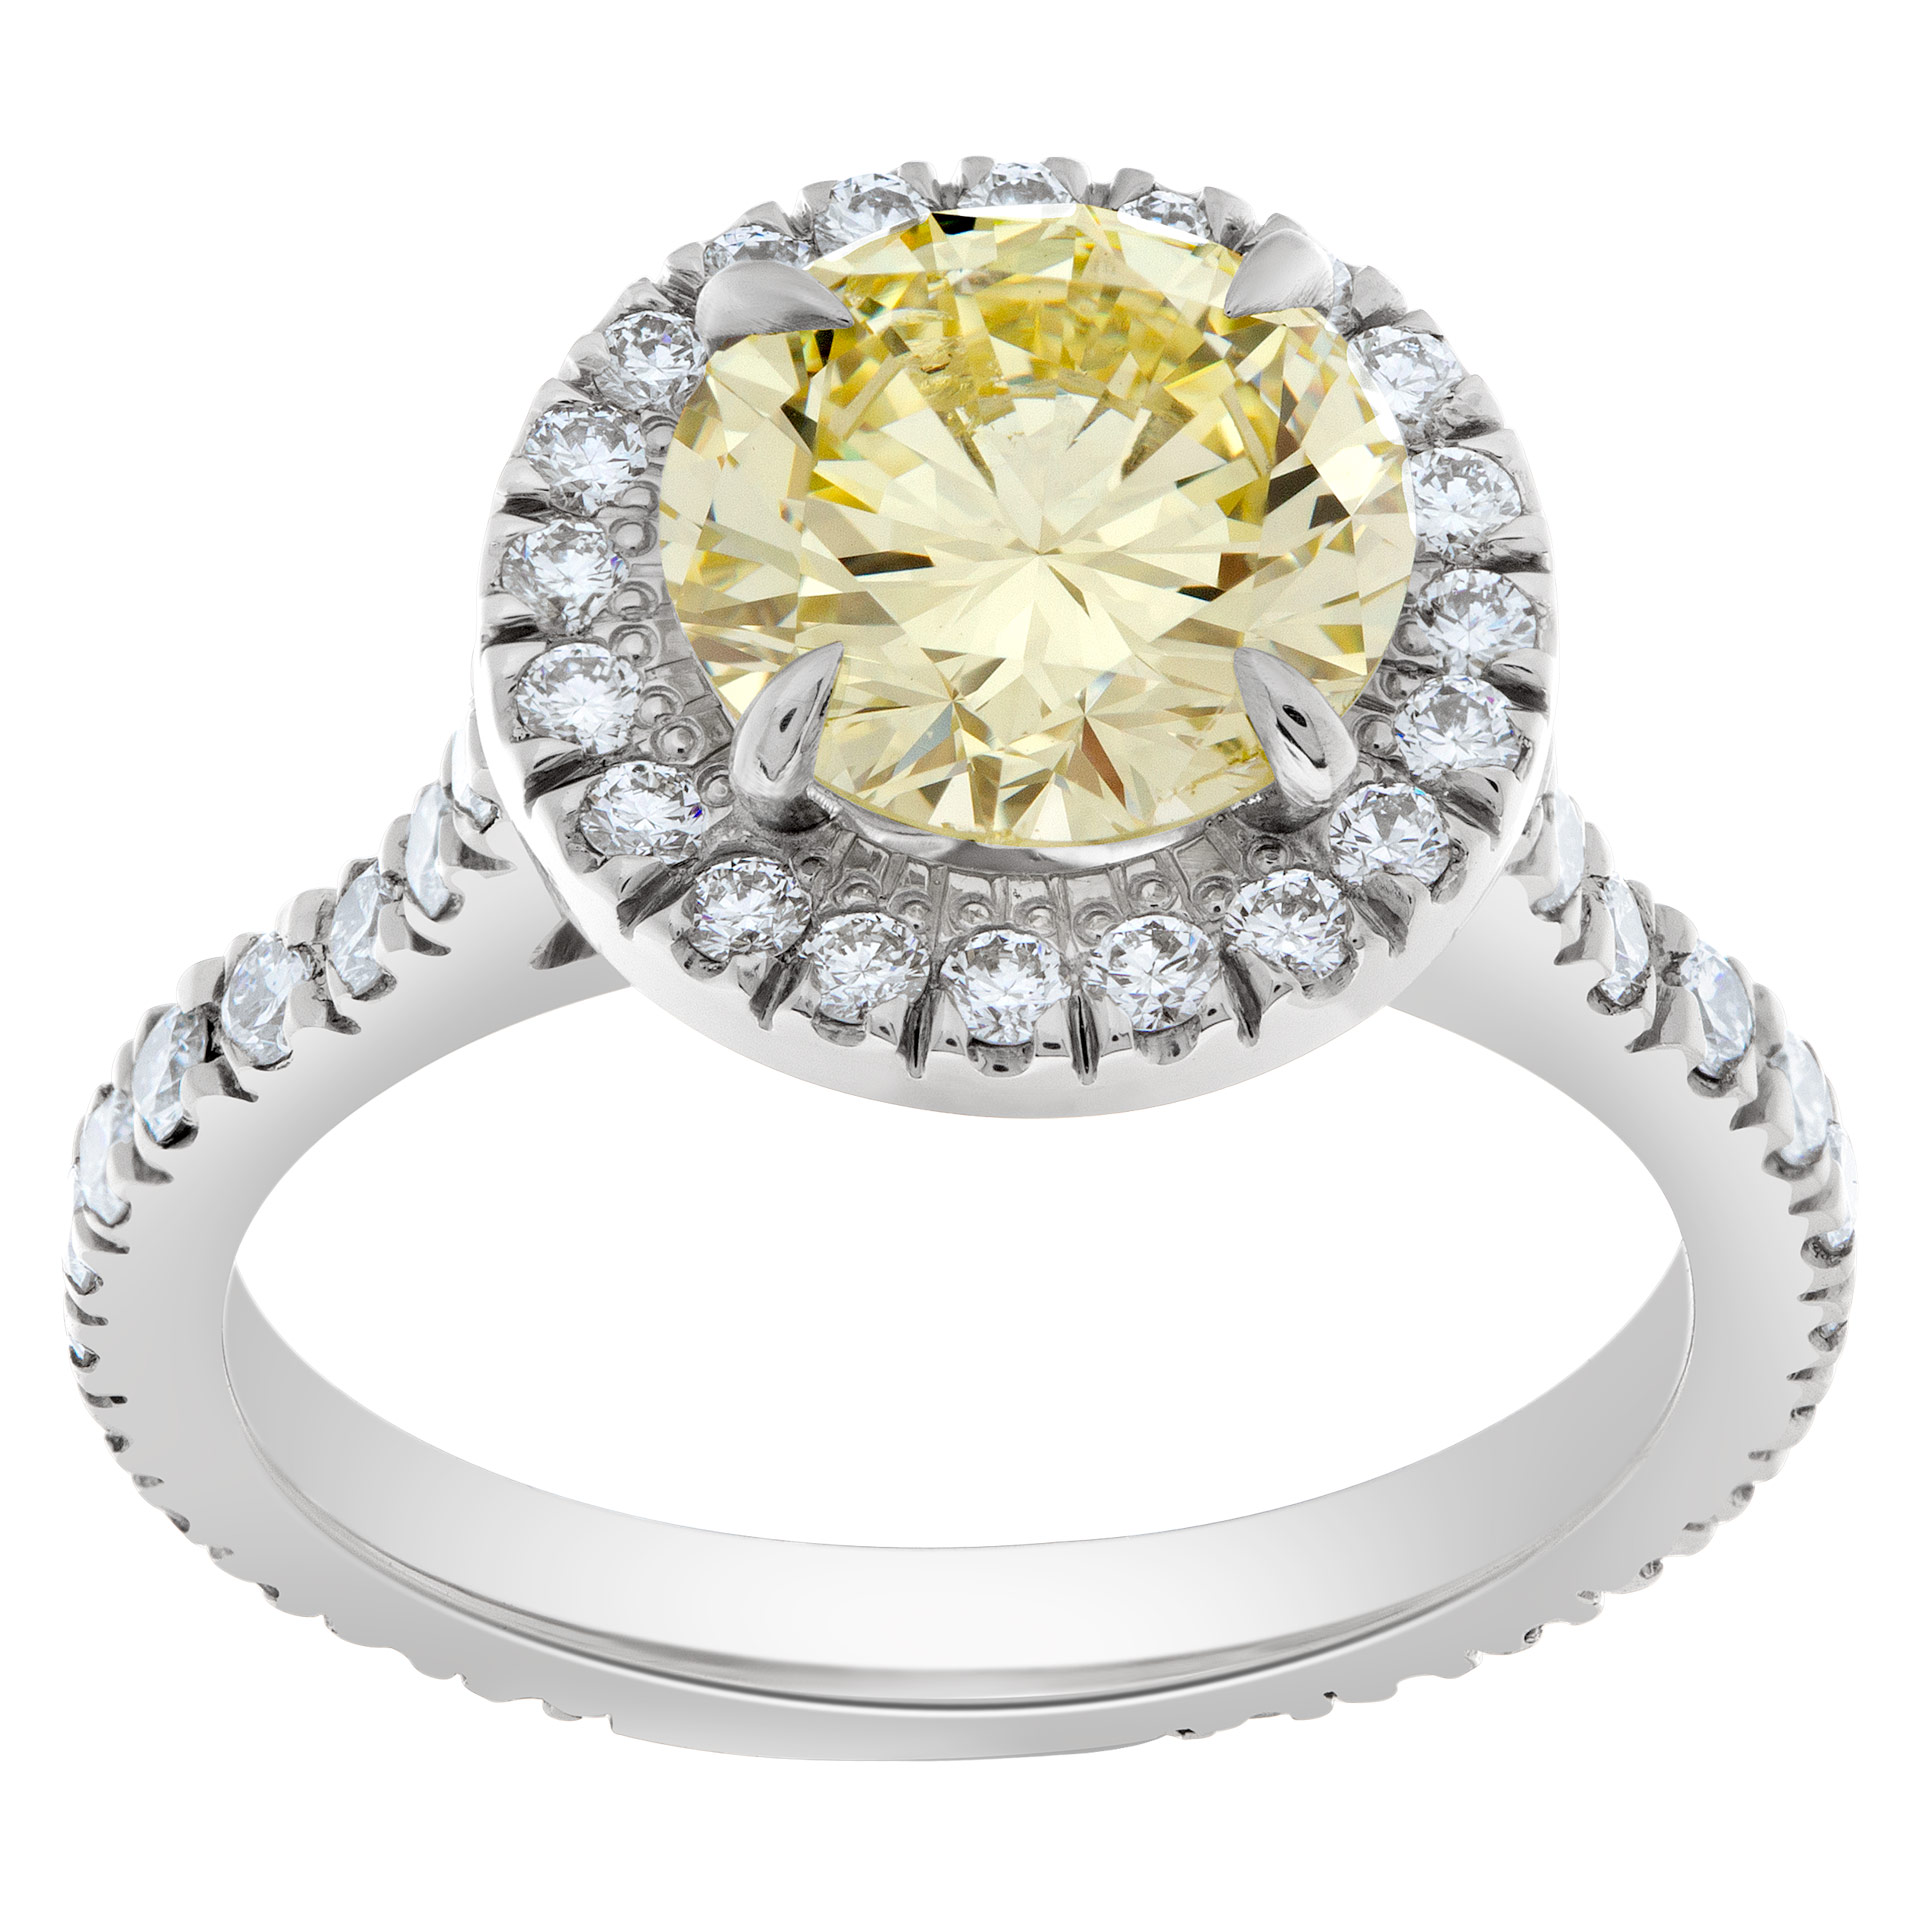 GIA certified round brilliant diamond 2.27 carat (W to X range color, SI2 clarity) ring image 1